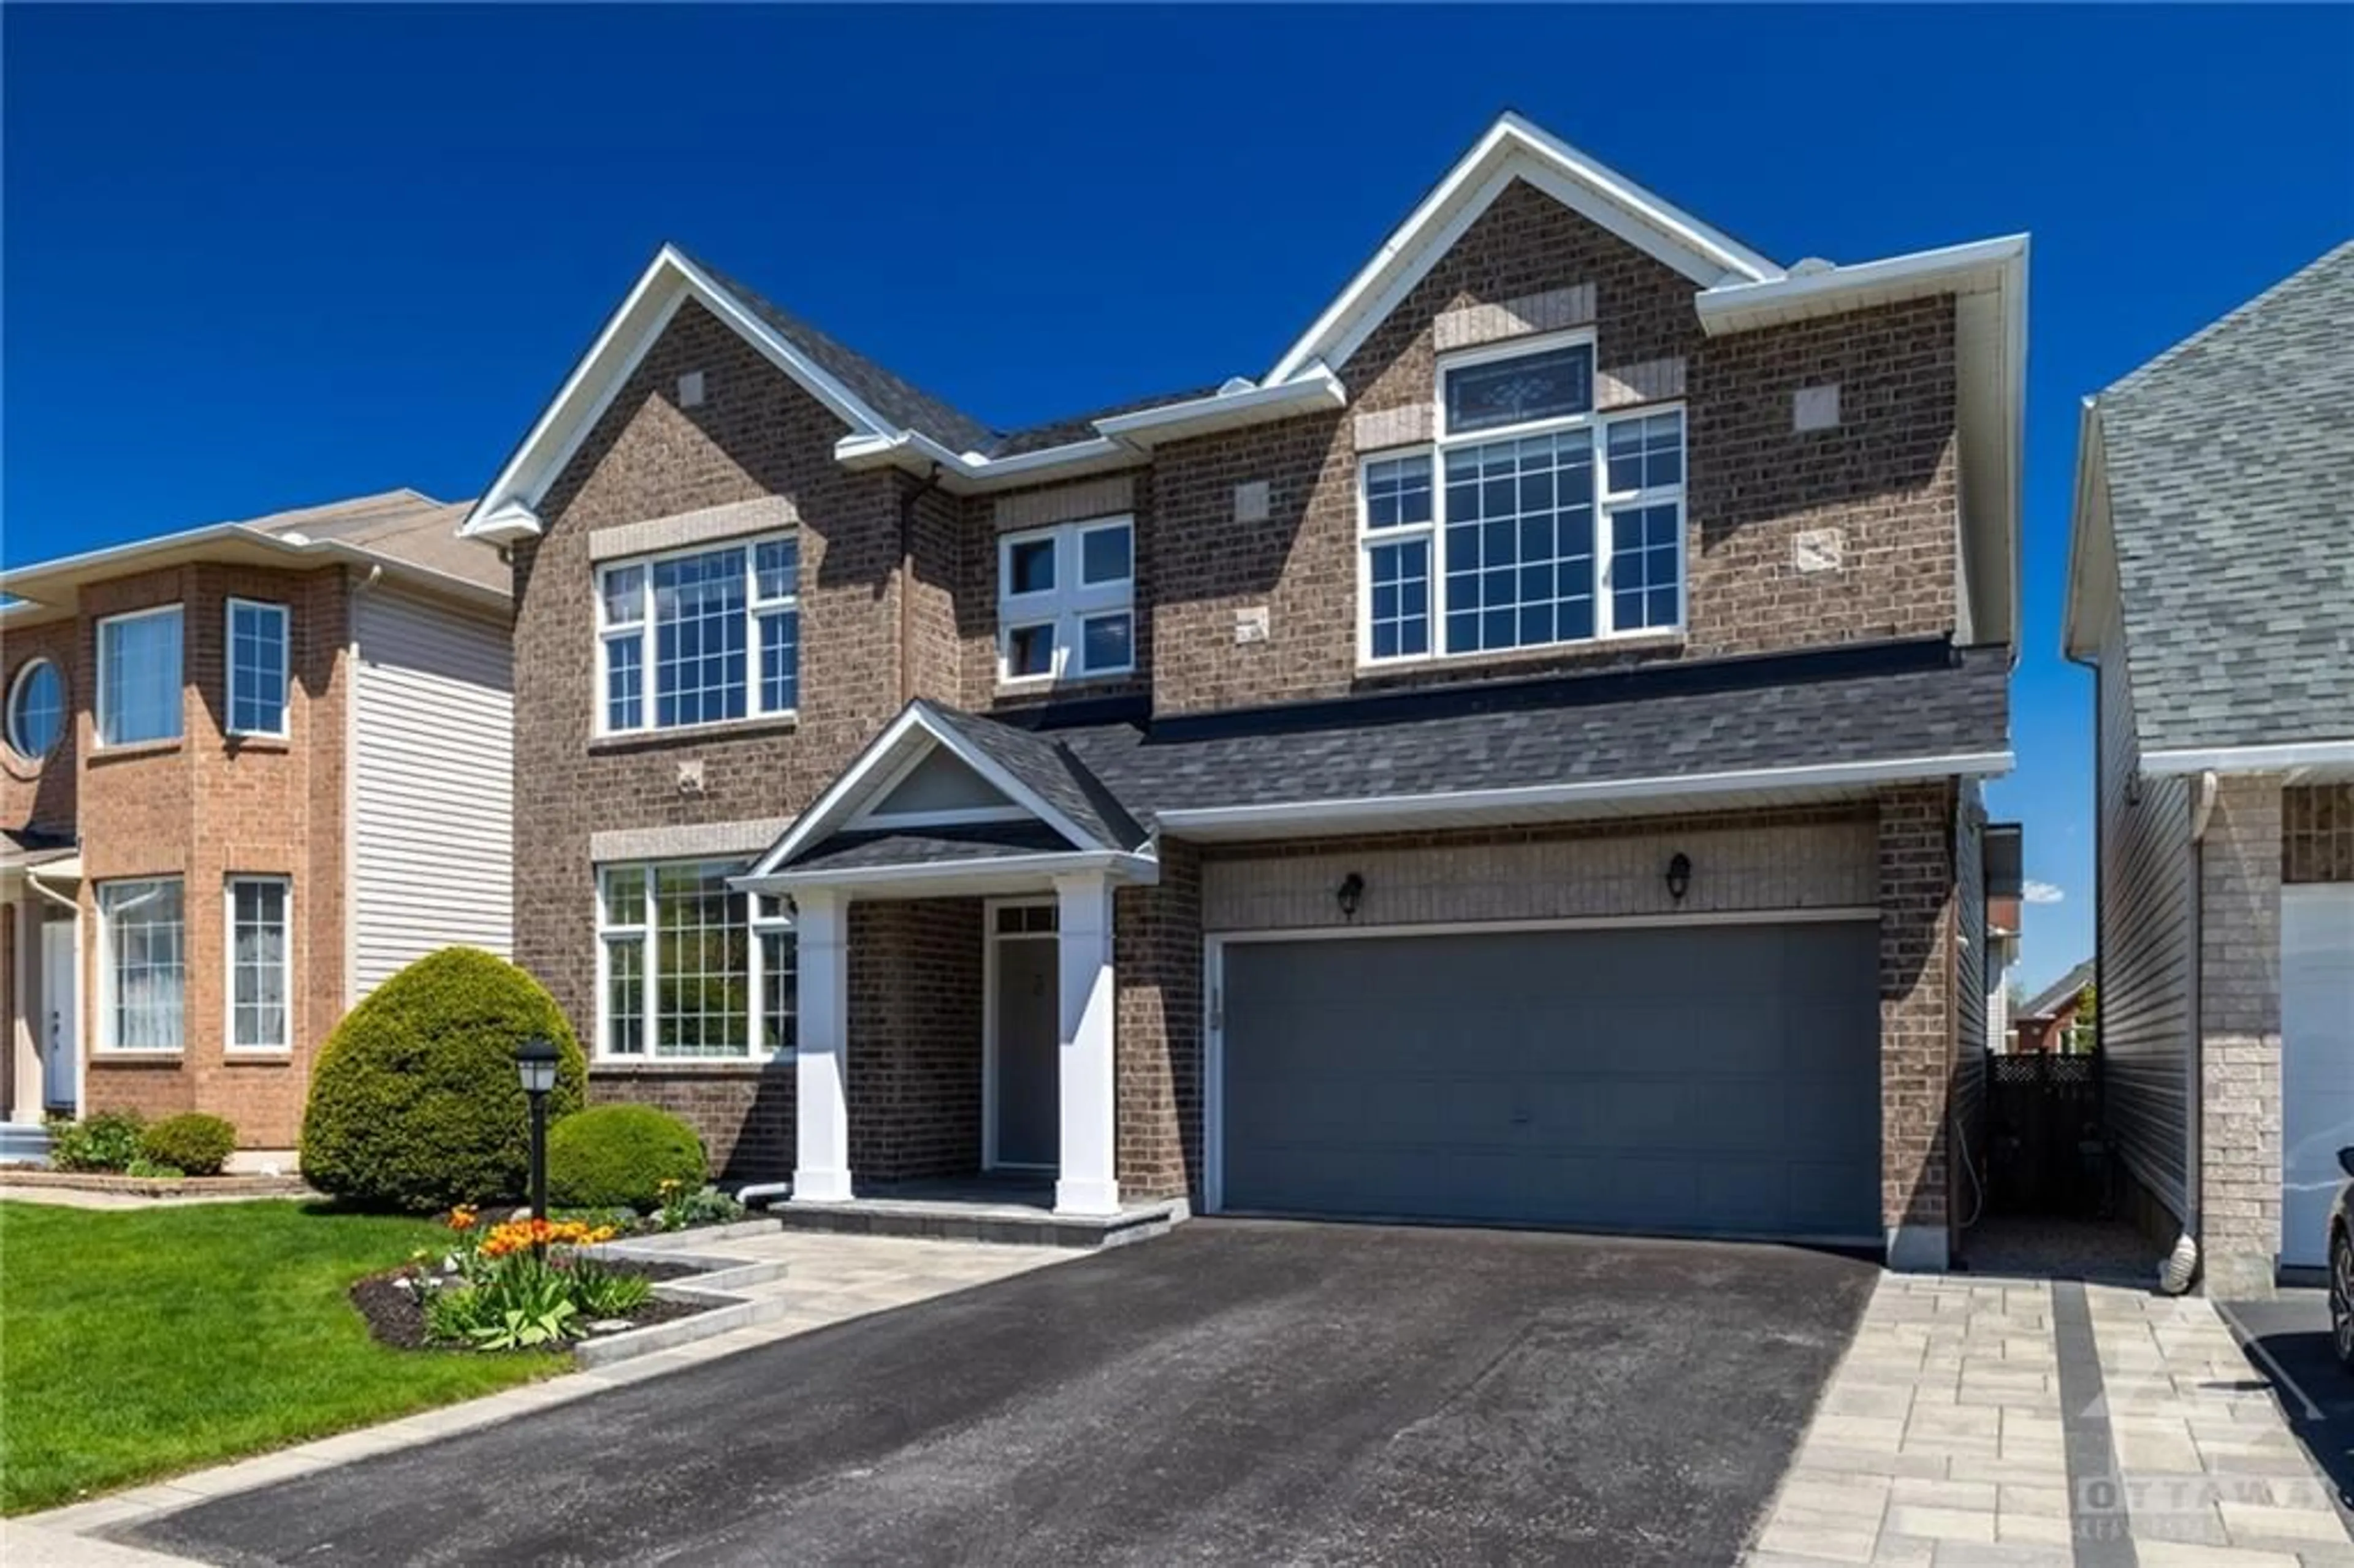 Home with brick exterior material for 31 SUNVALE Way, Ottawa Ontario K2G 6Y1